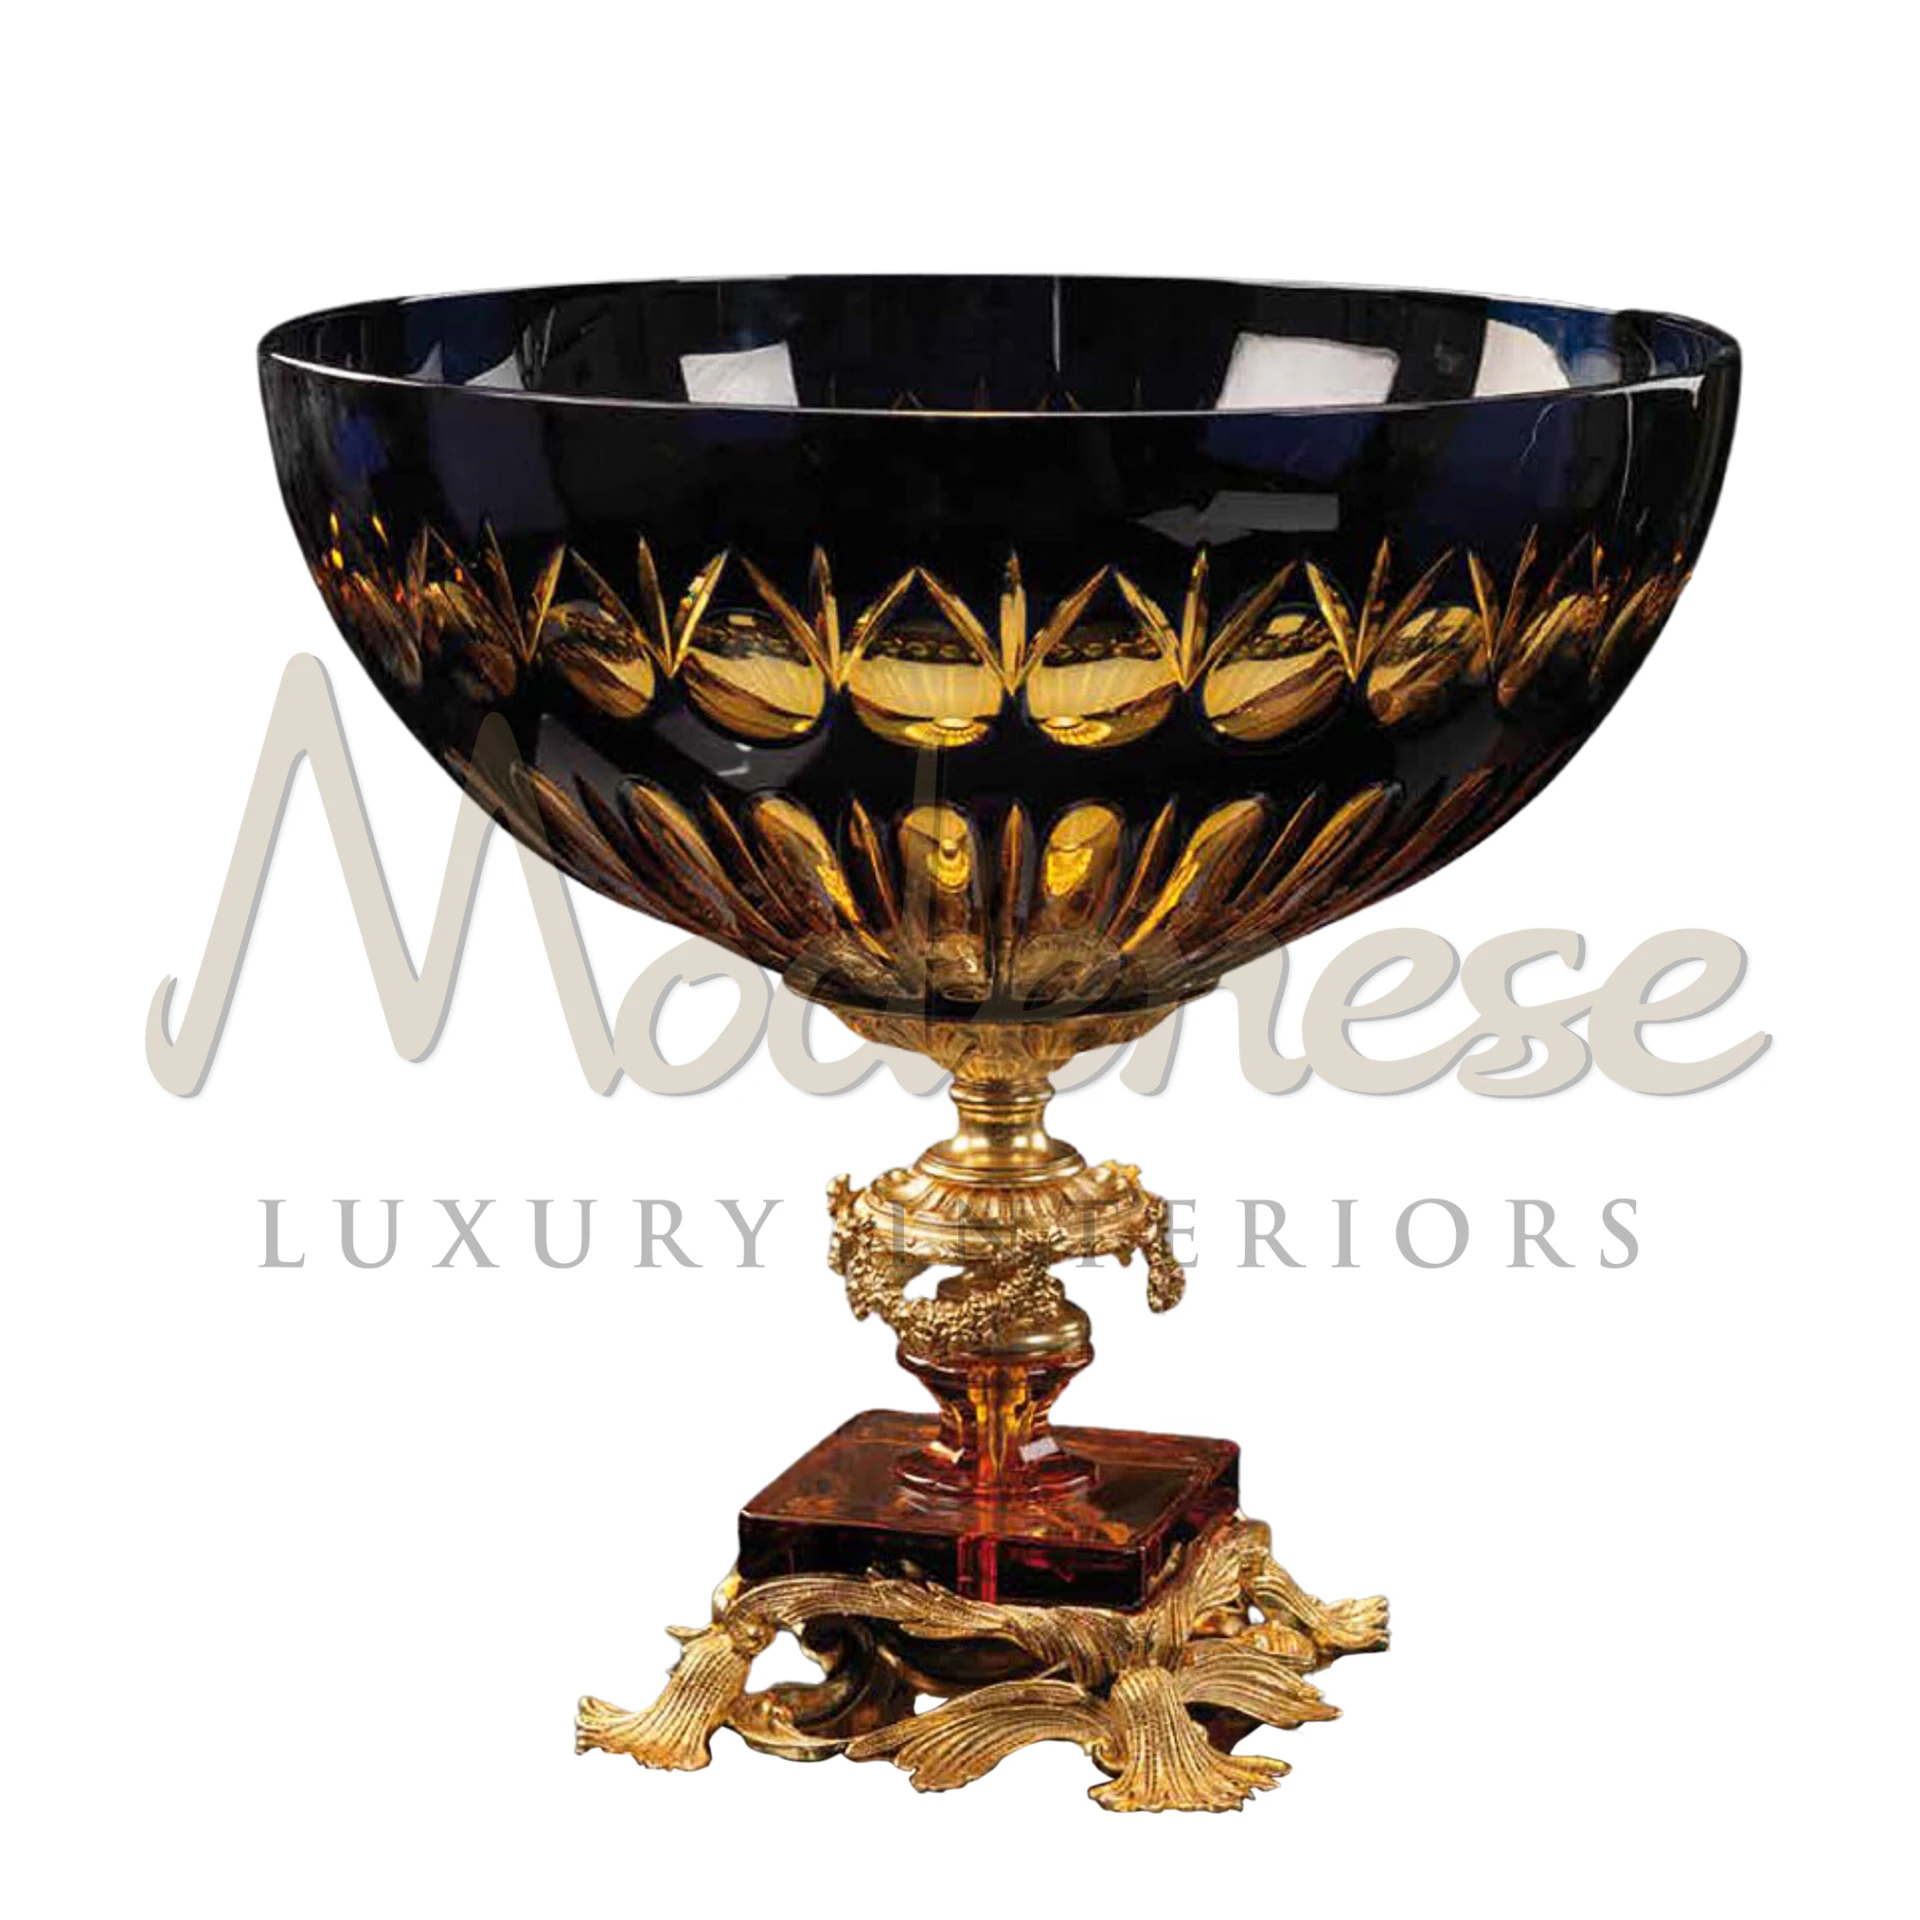 Royal Black Glass Bowl by Modenese Furniture, showcasing luxury, elegance, and baroque style in interior design.